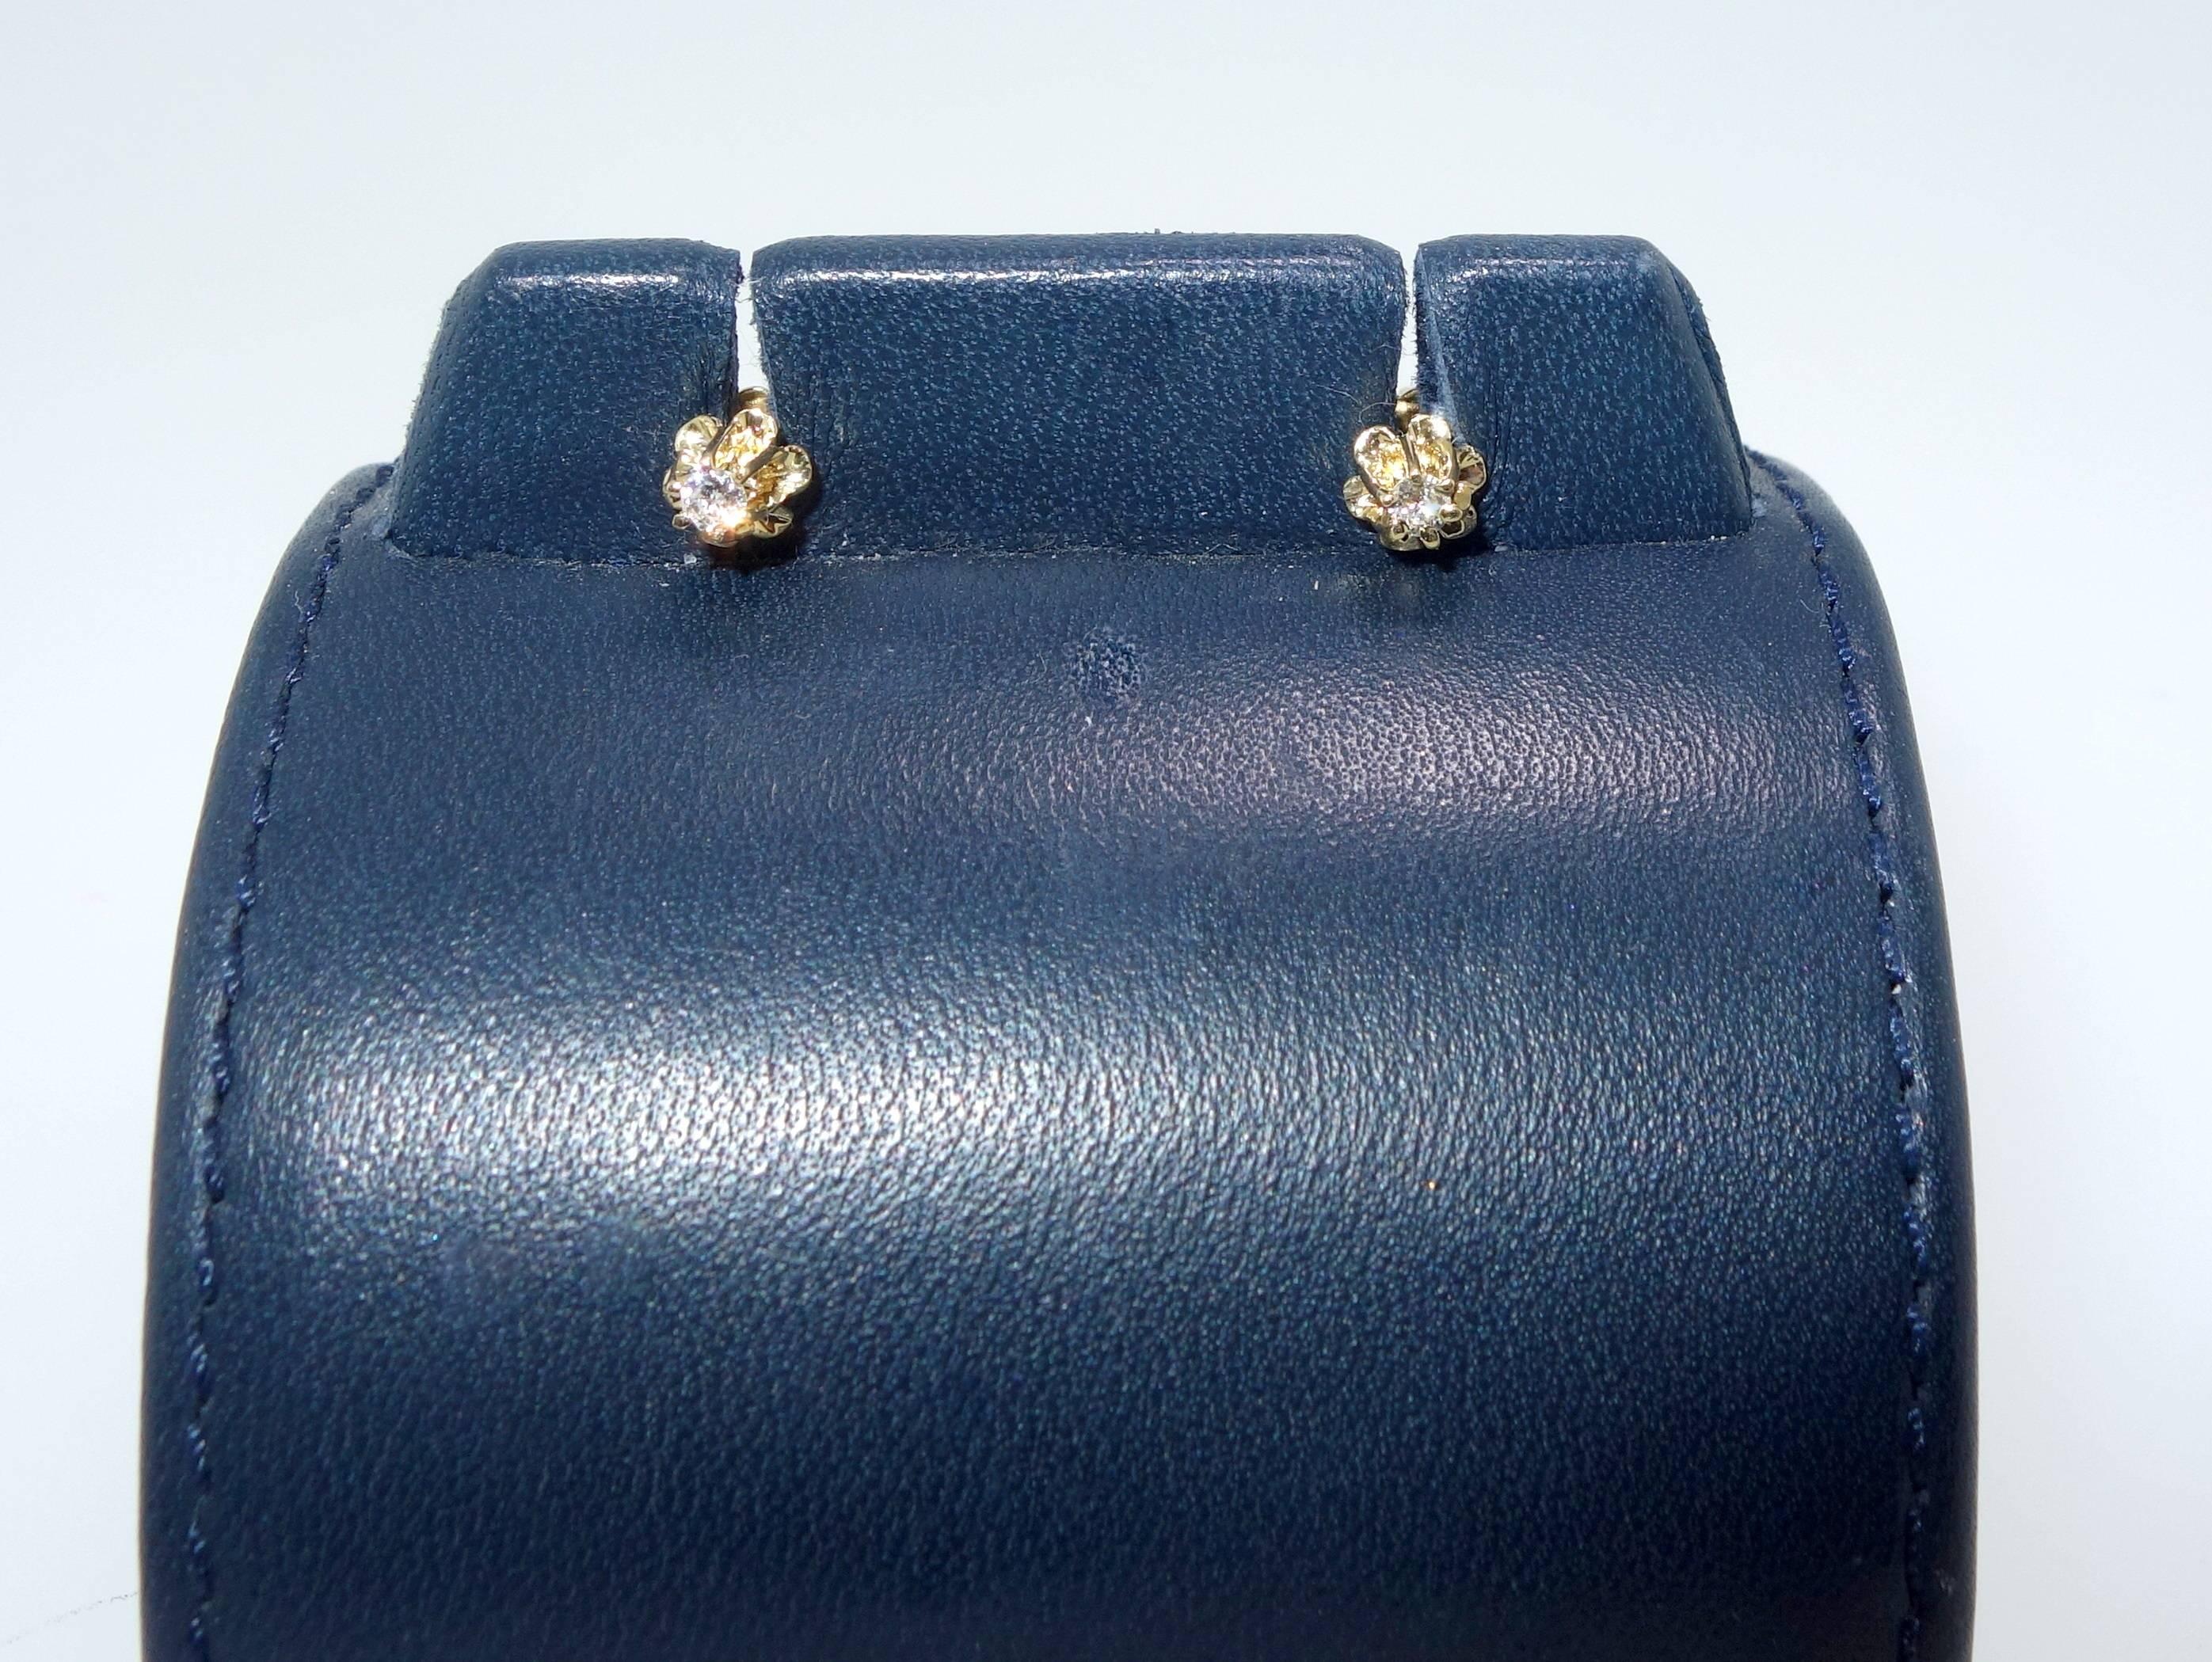 14K yellow gold buttercup diamond stud earrings with a total diamond weight of .10 cts.  Small but very cute.